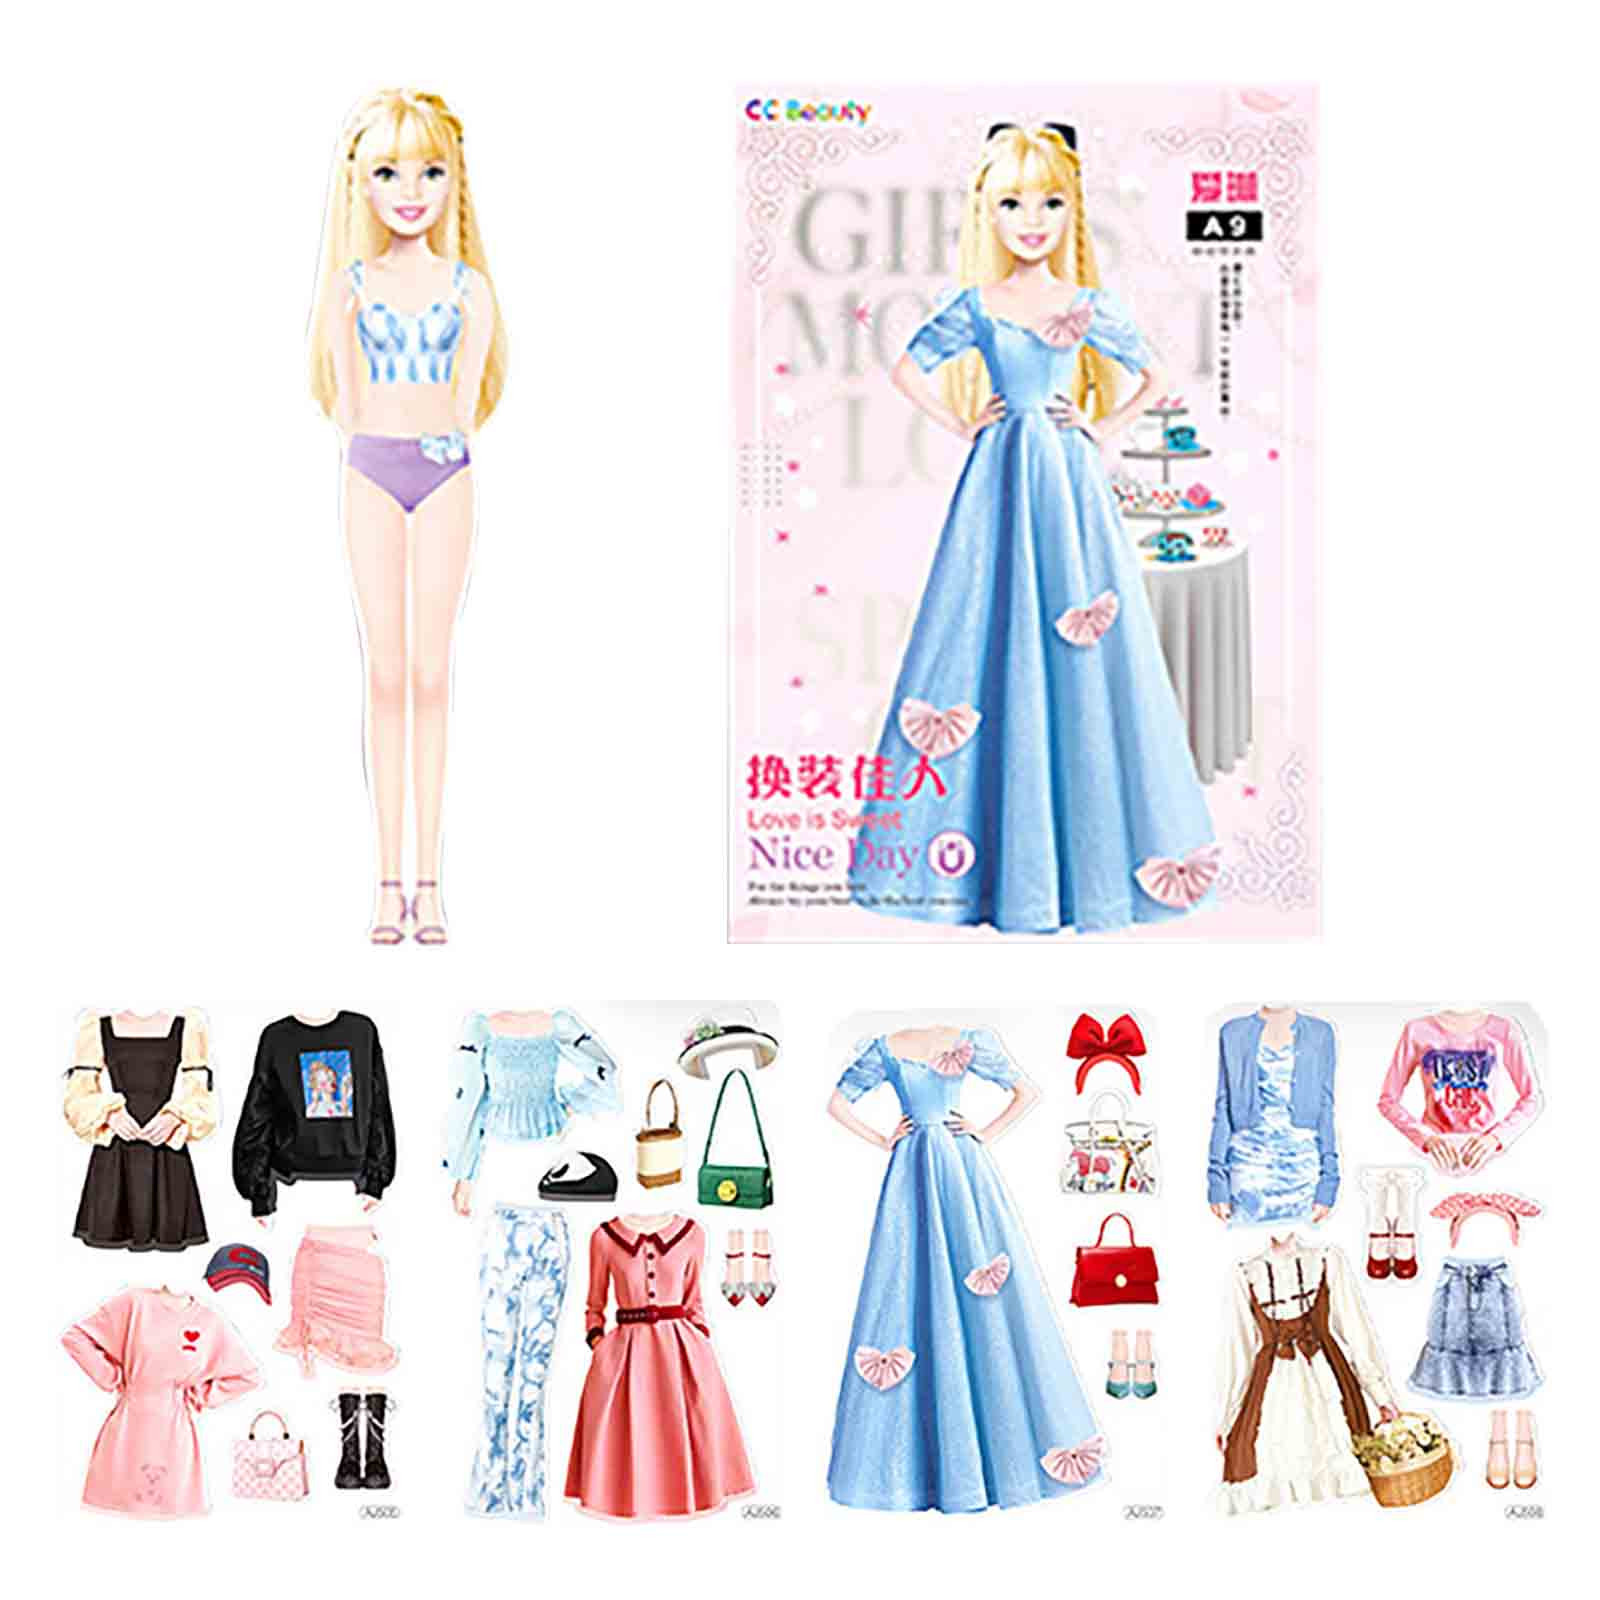 TUWABEII Games and Puzzles for Kids,Magnetic Dress Up Baby Magnetic Princess Dress Up Paper Doll Magnet Dress Up Pretend And Play Travel Playset Toy Magnetic Dress Up Dolls For Girls Kid's Gift - image 1 of 6